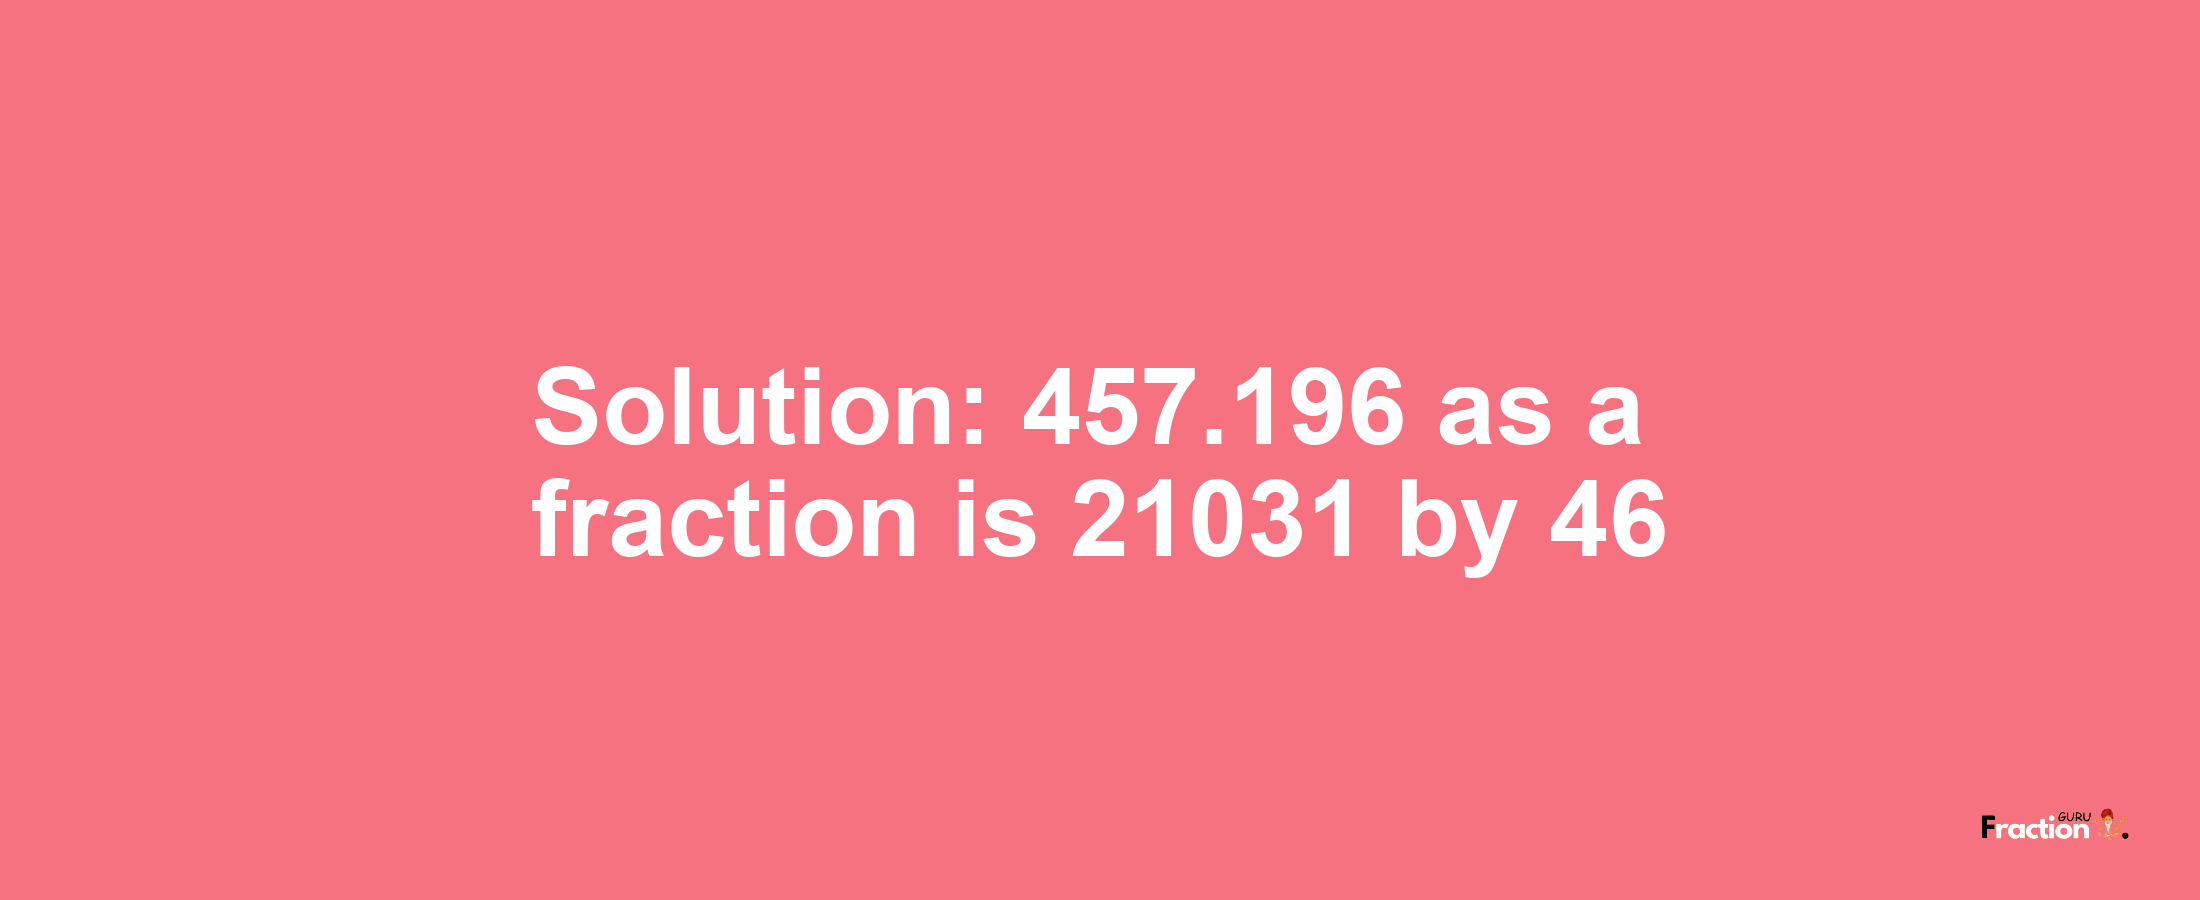 Solution:457.196 as a fraction is 21031/46